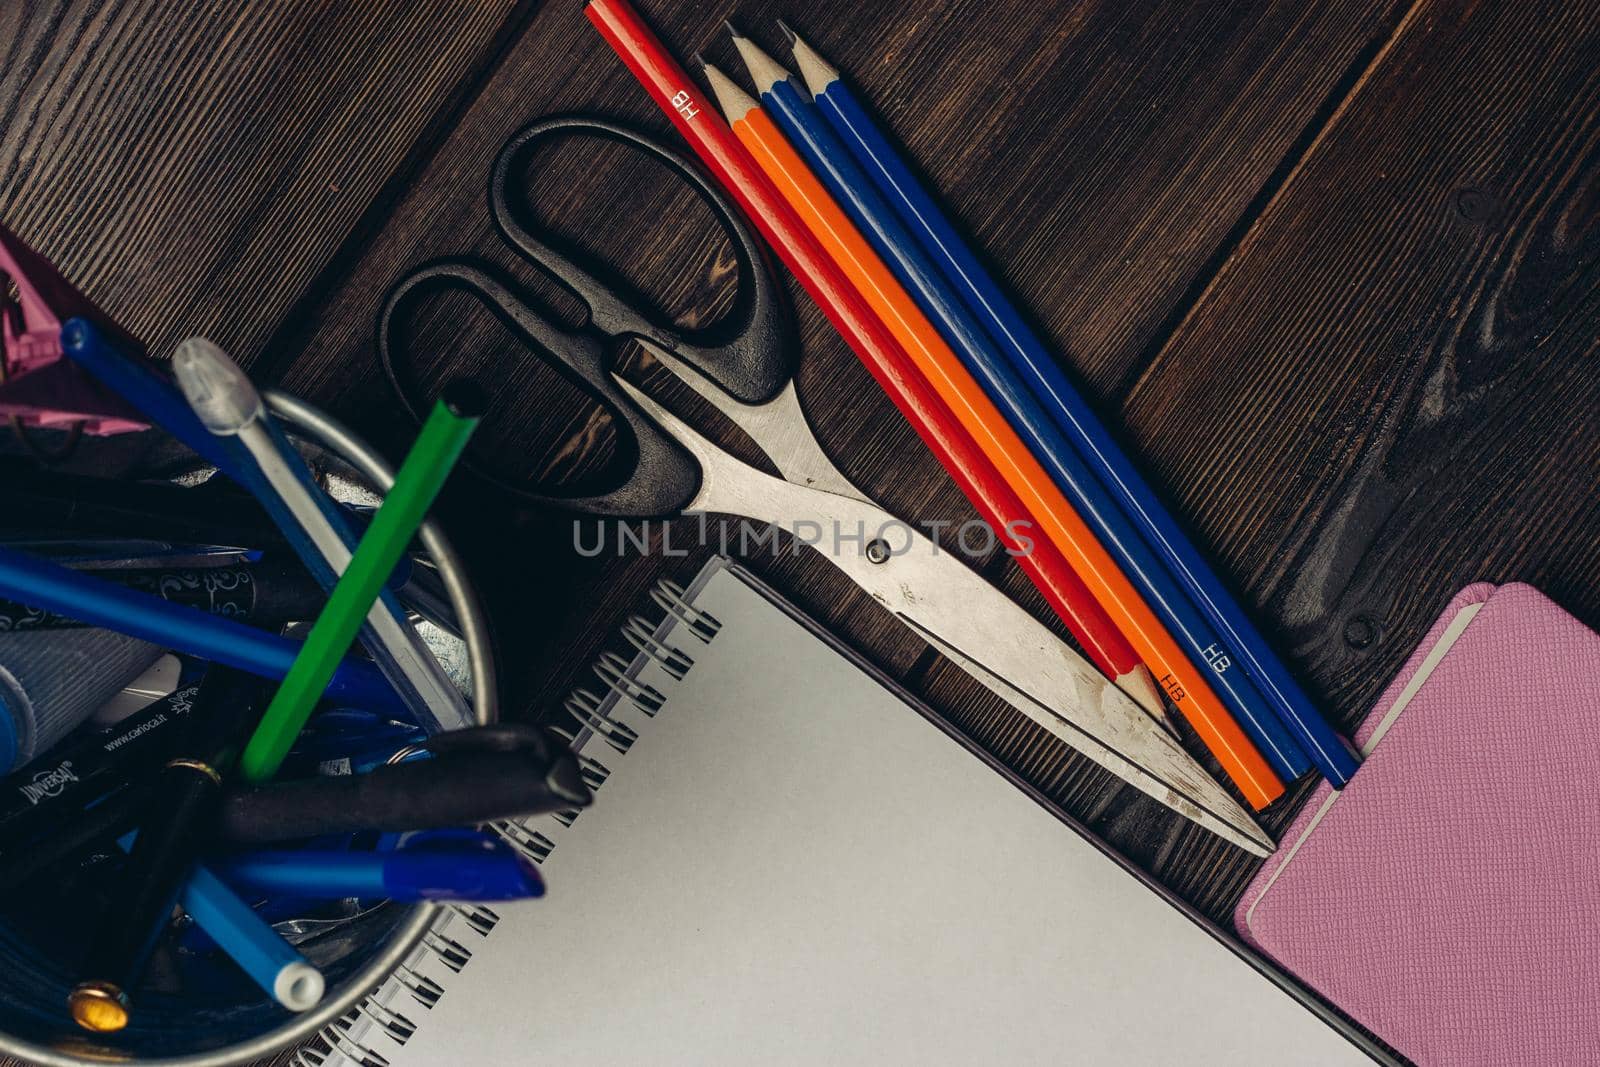 notepads colored pencils scissors office top view. High quality photo